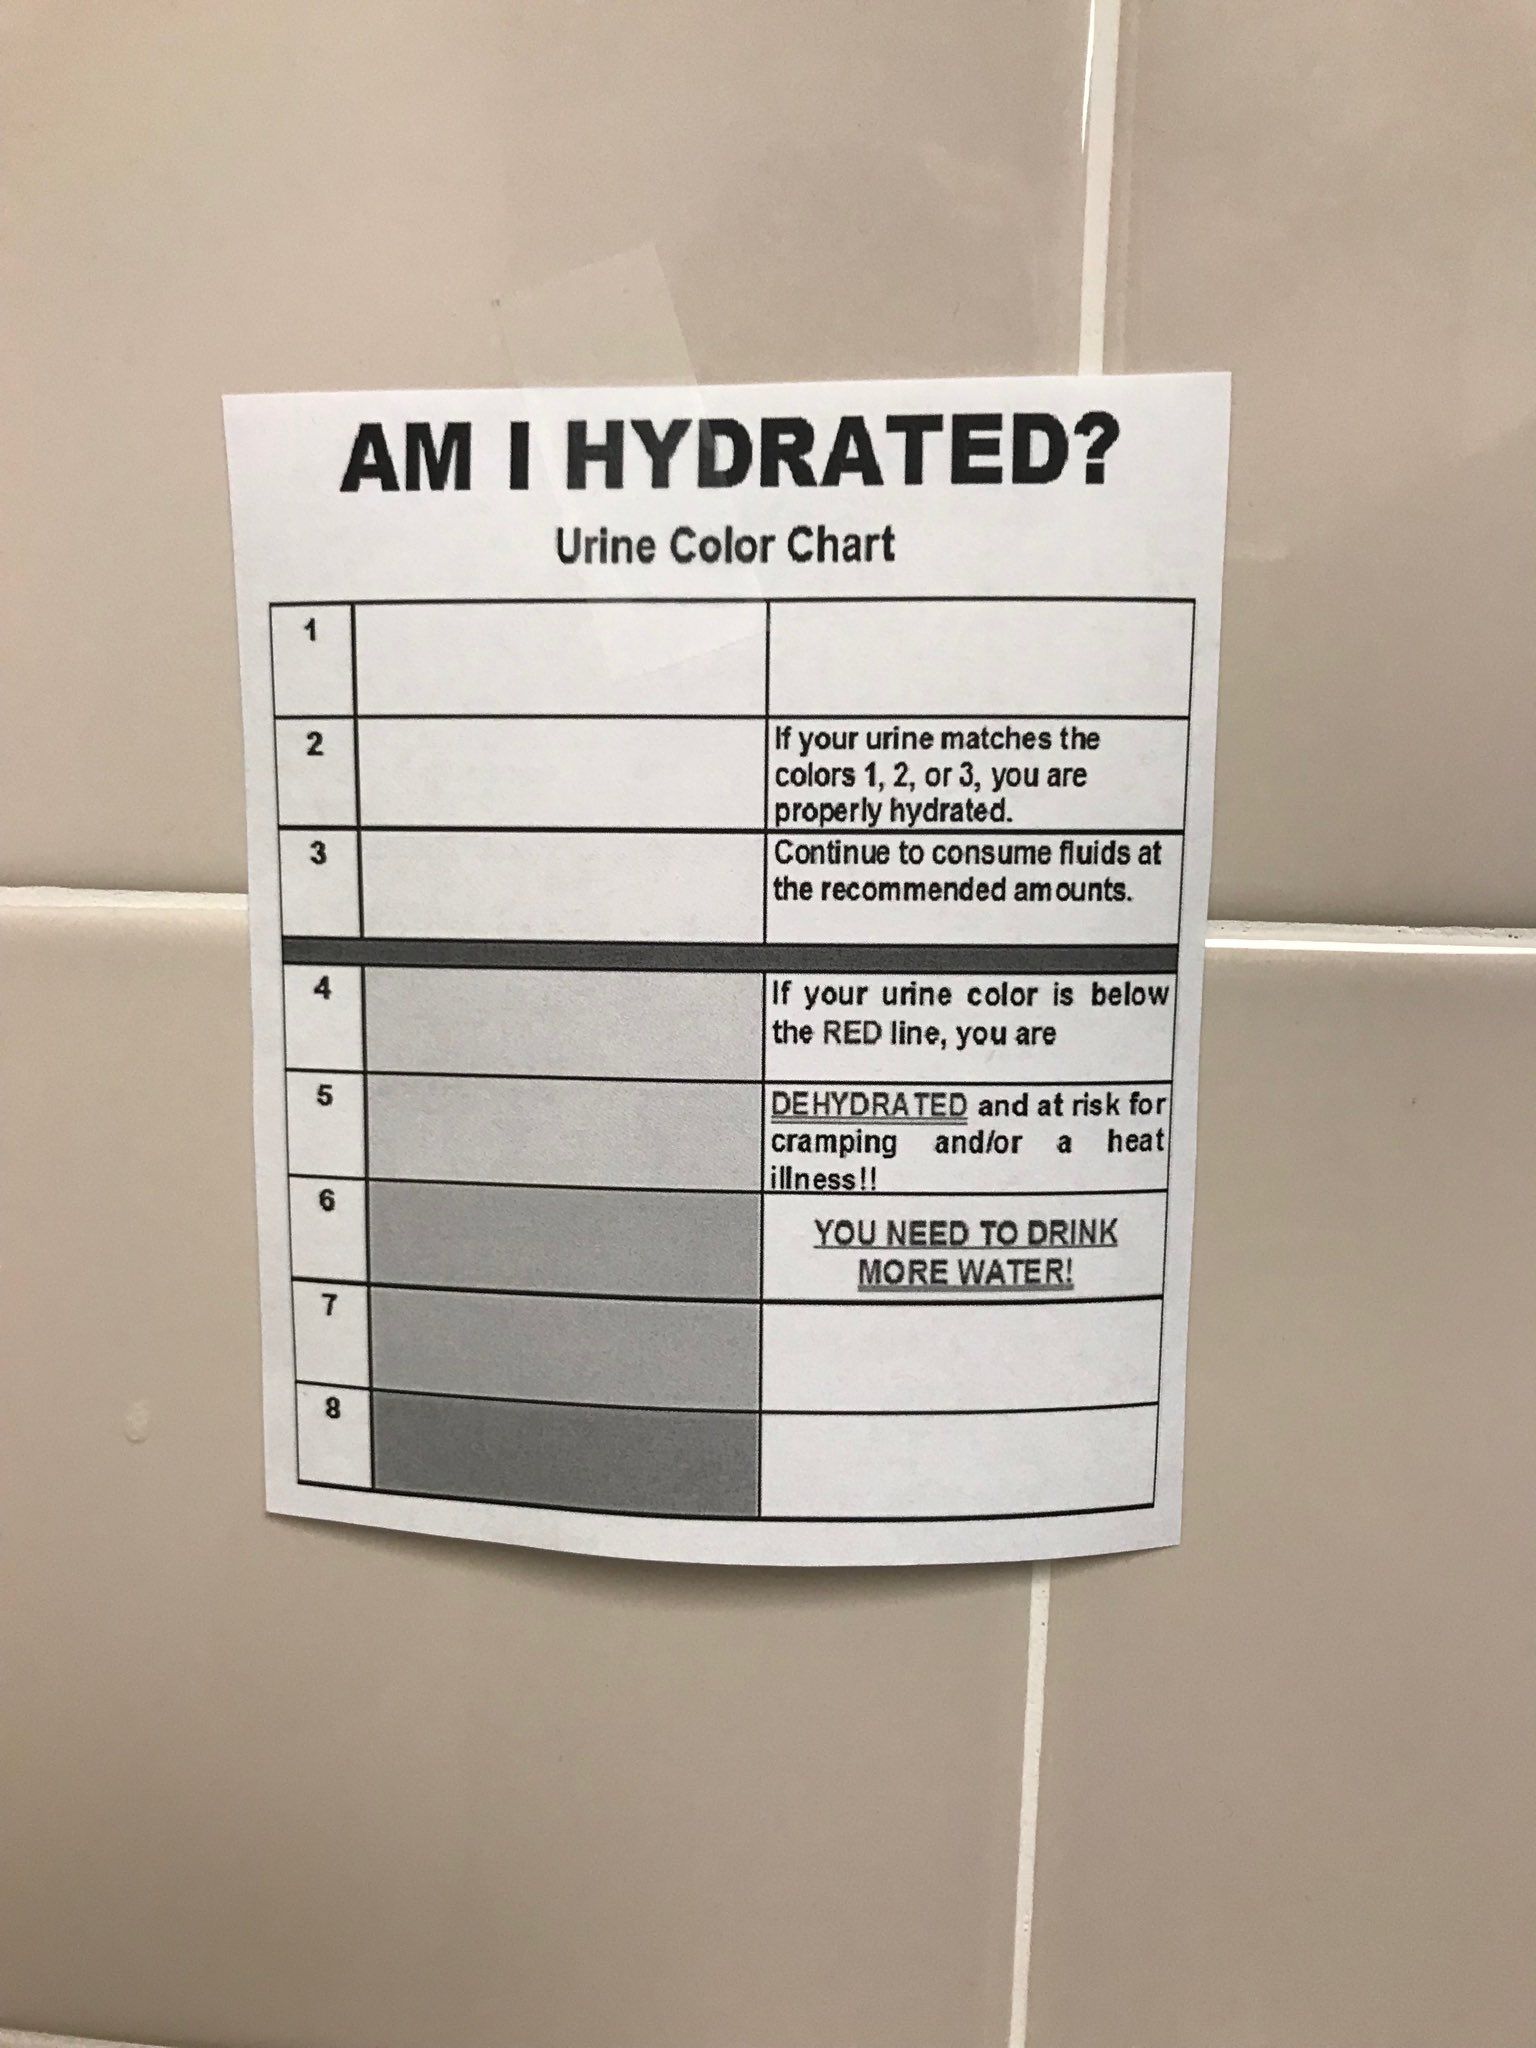 Someone posted this on the urinal and it's in black and white